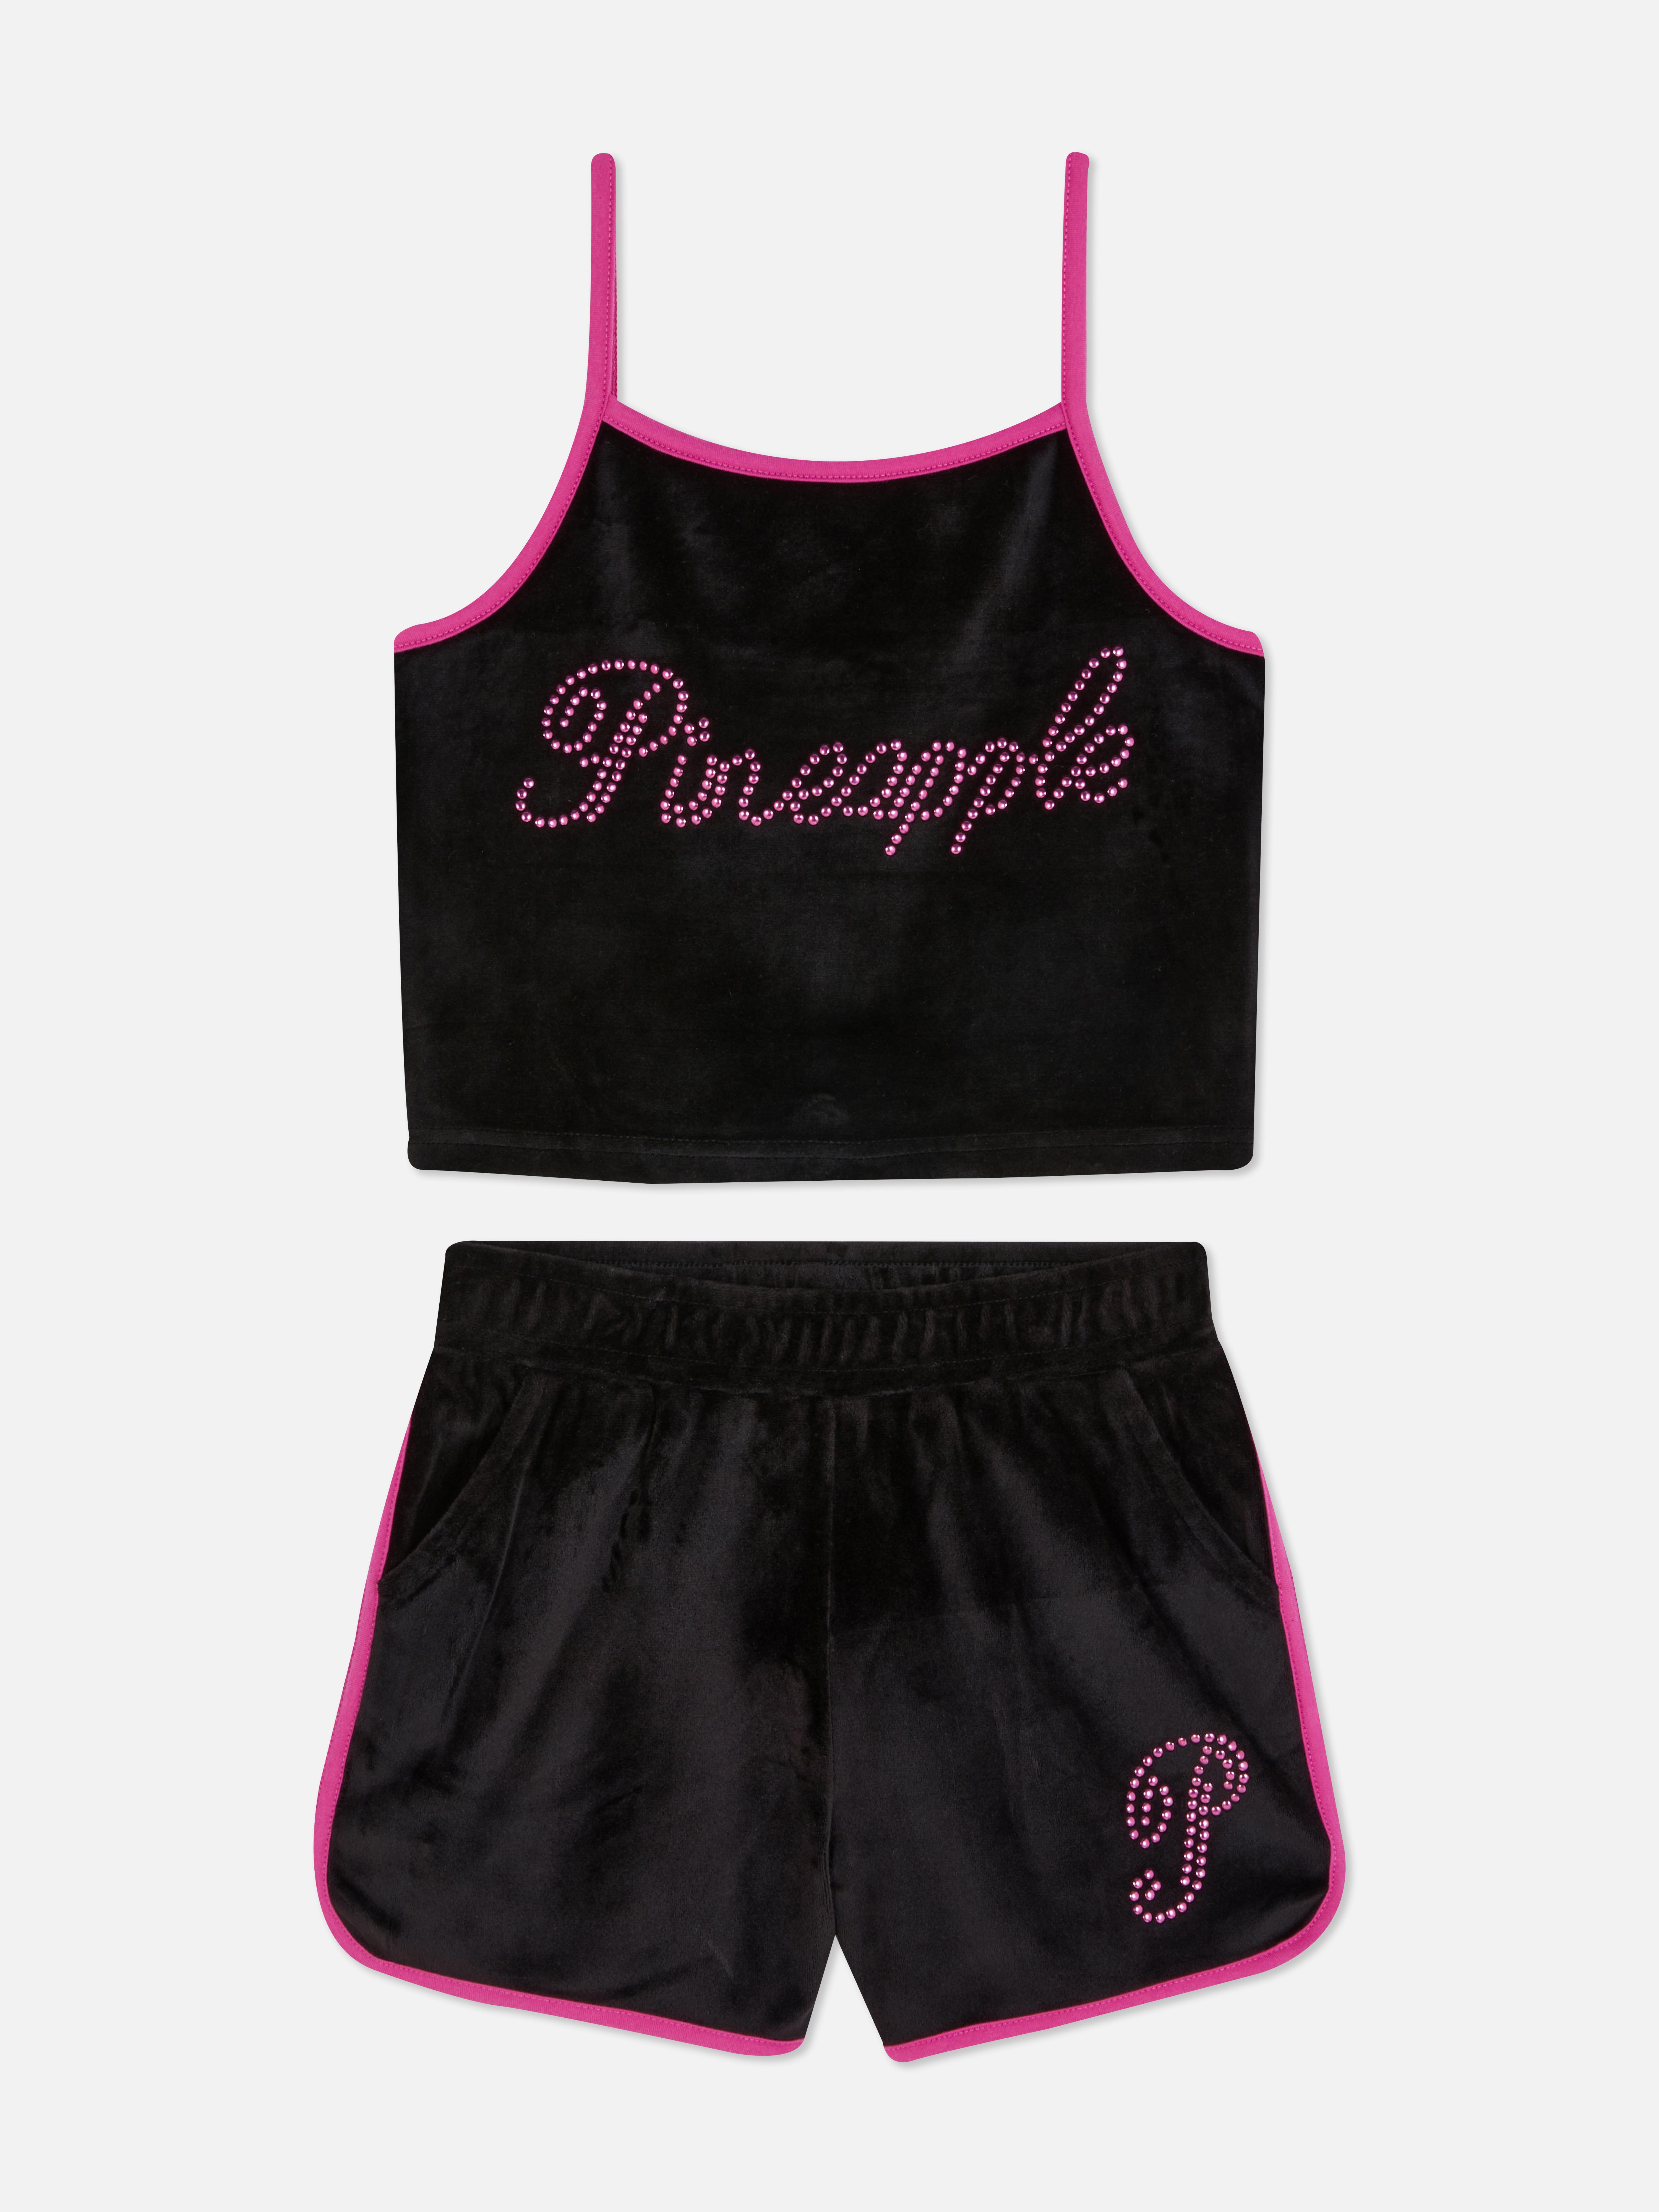 Pineapple Dance Studios Velour Top and Shorts Co-ord Set